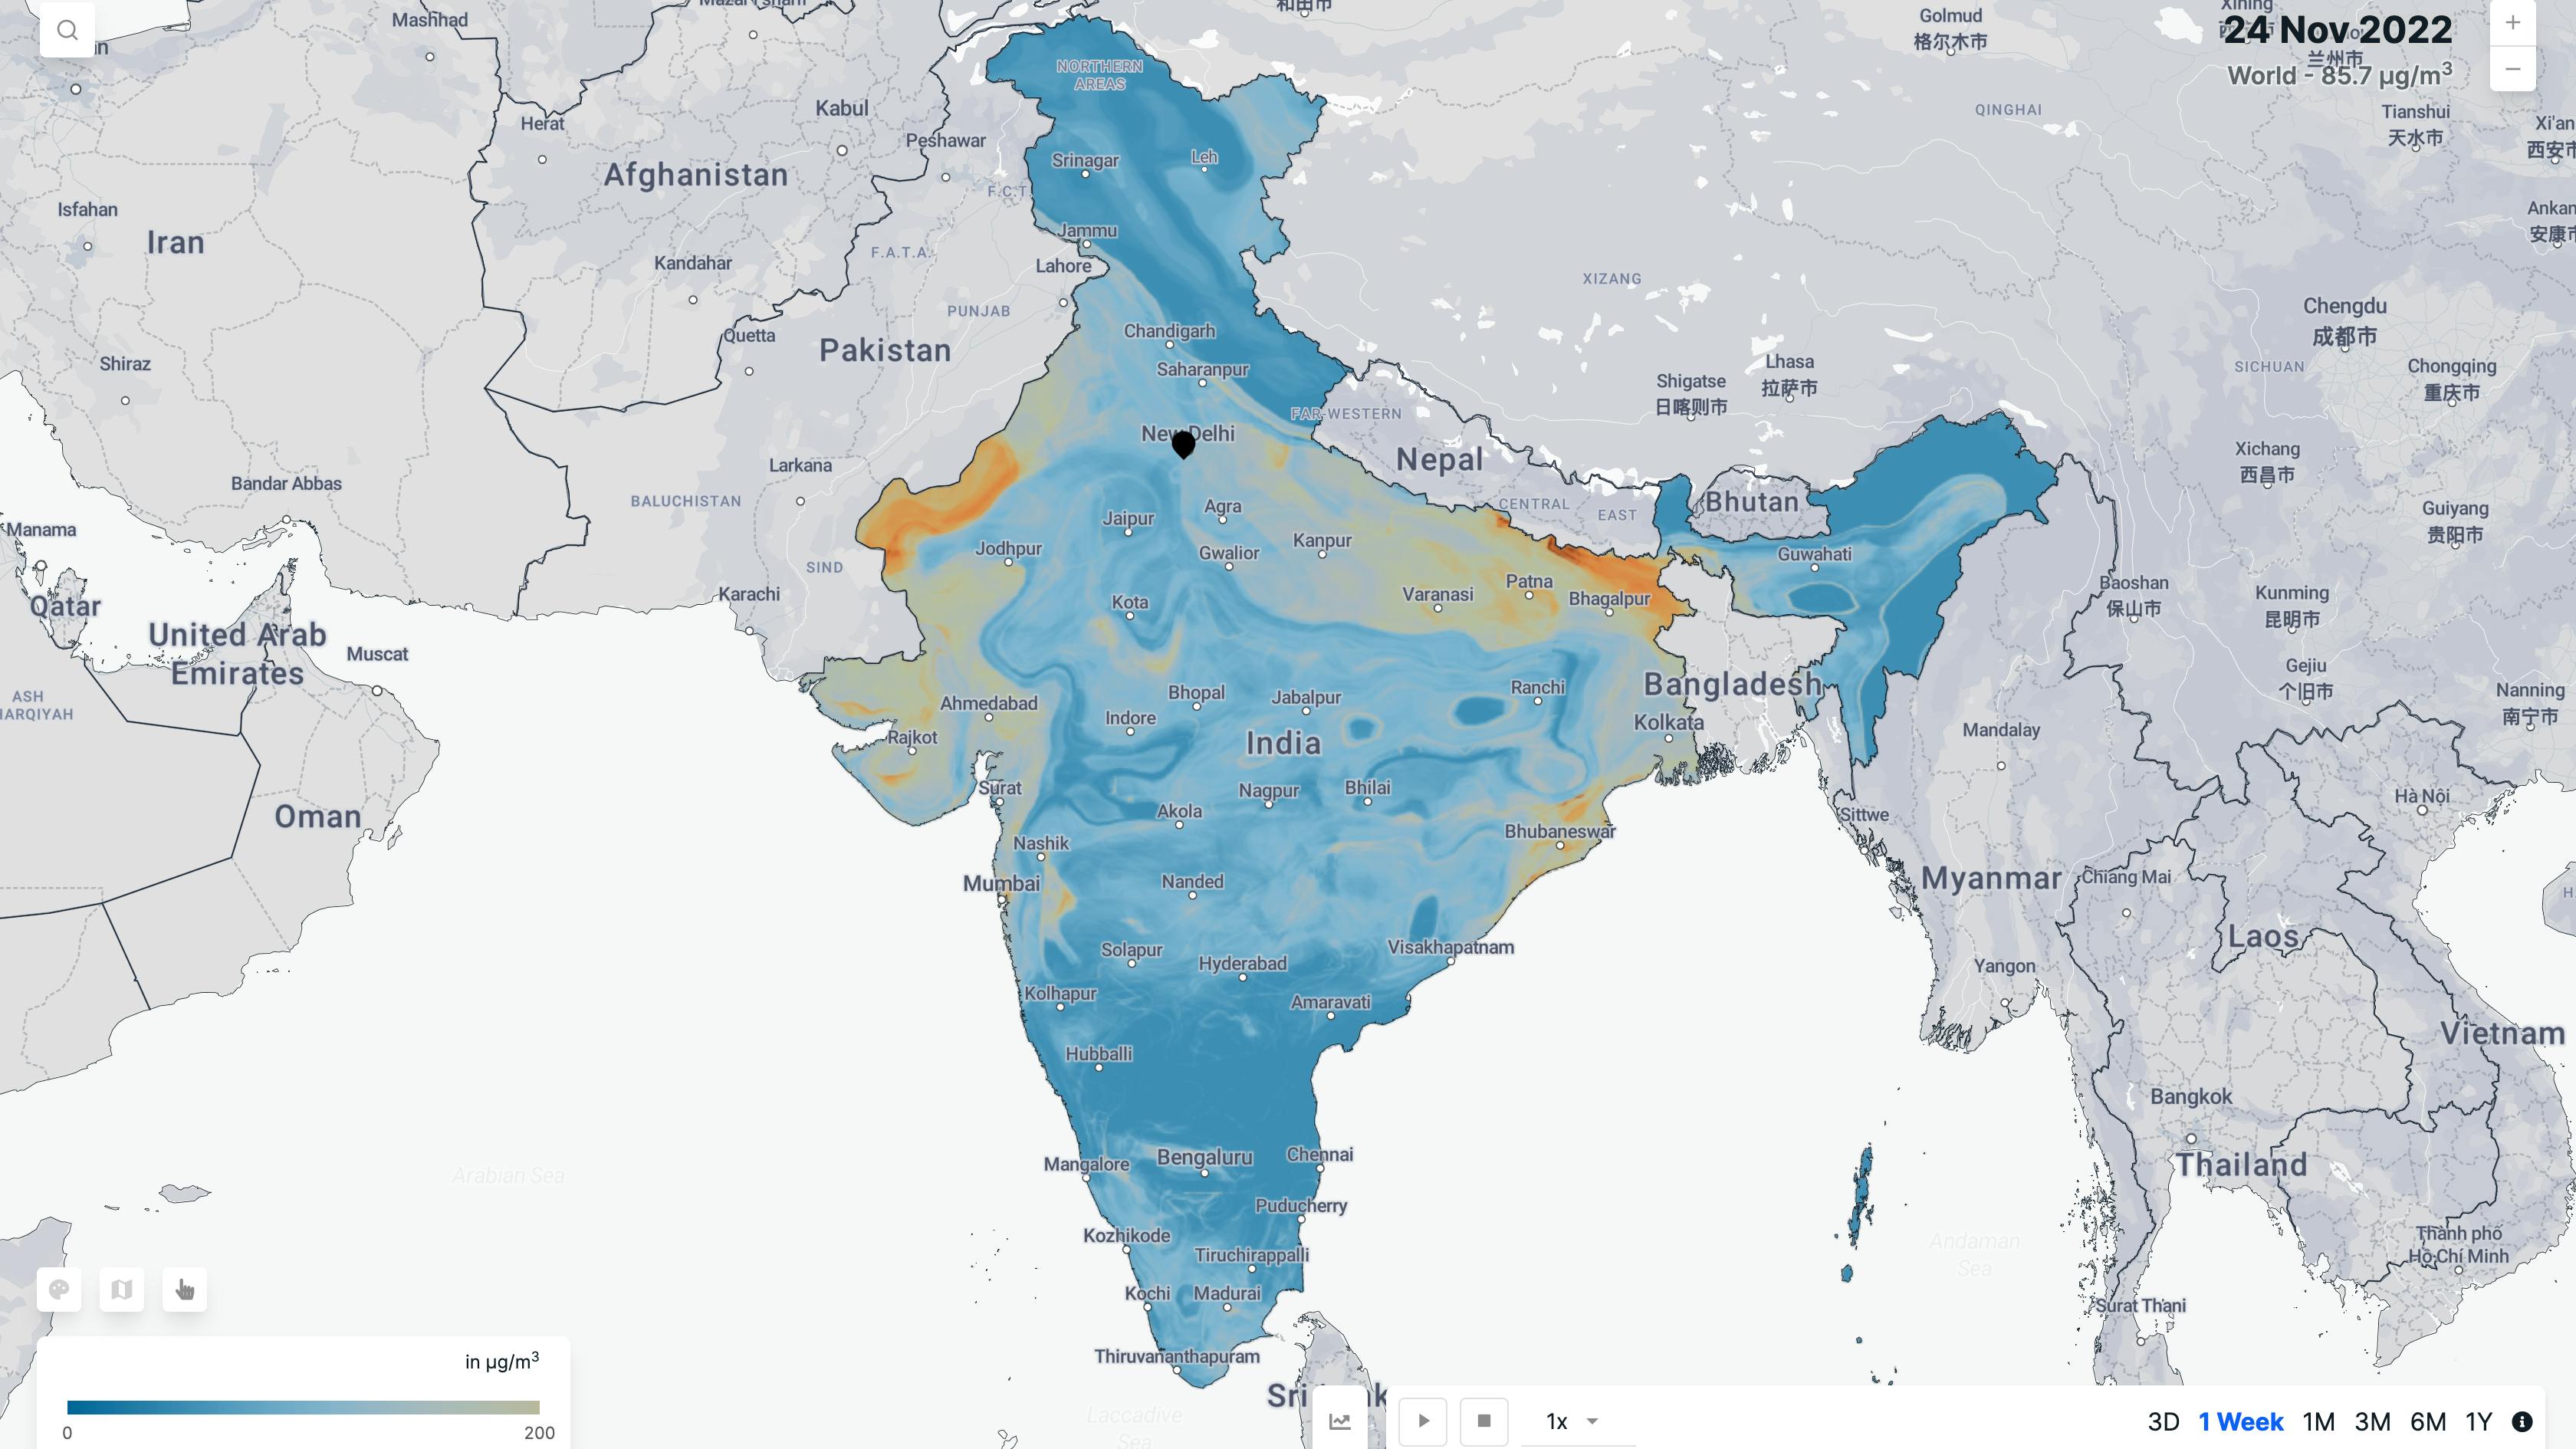 The spatial distribution of estimated PM2.5 levels in India.